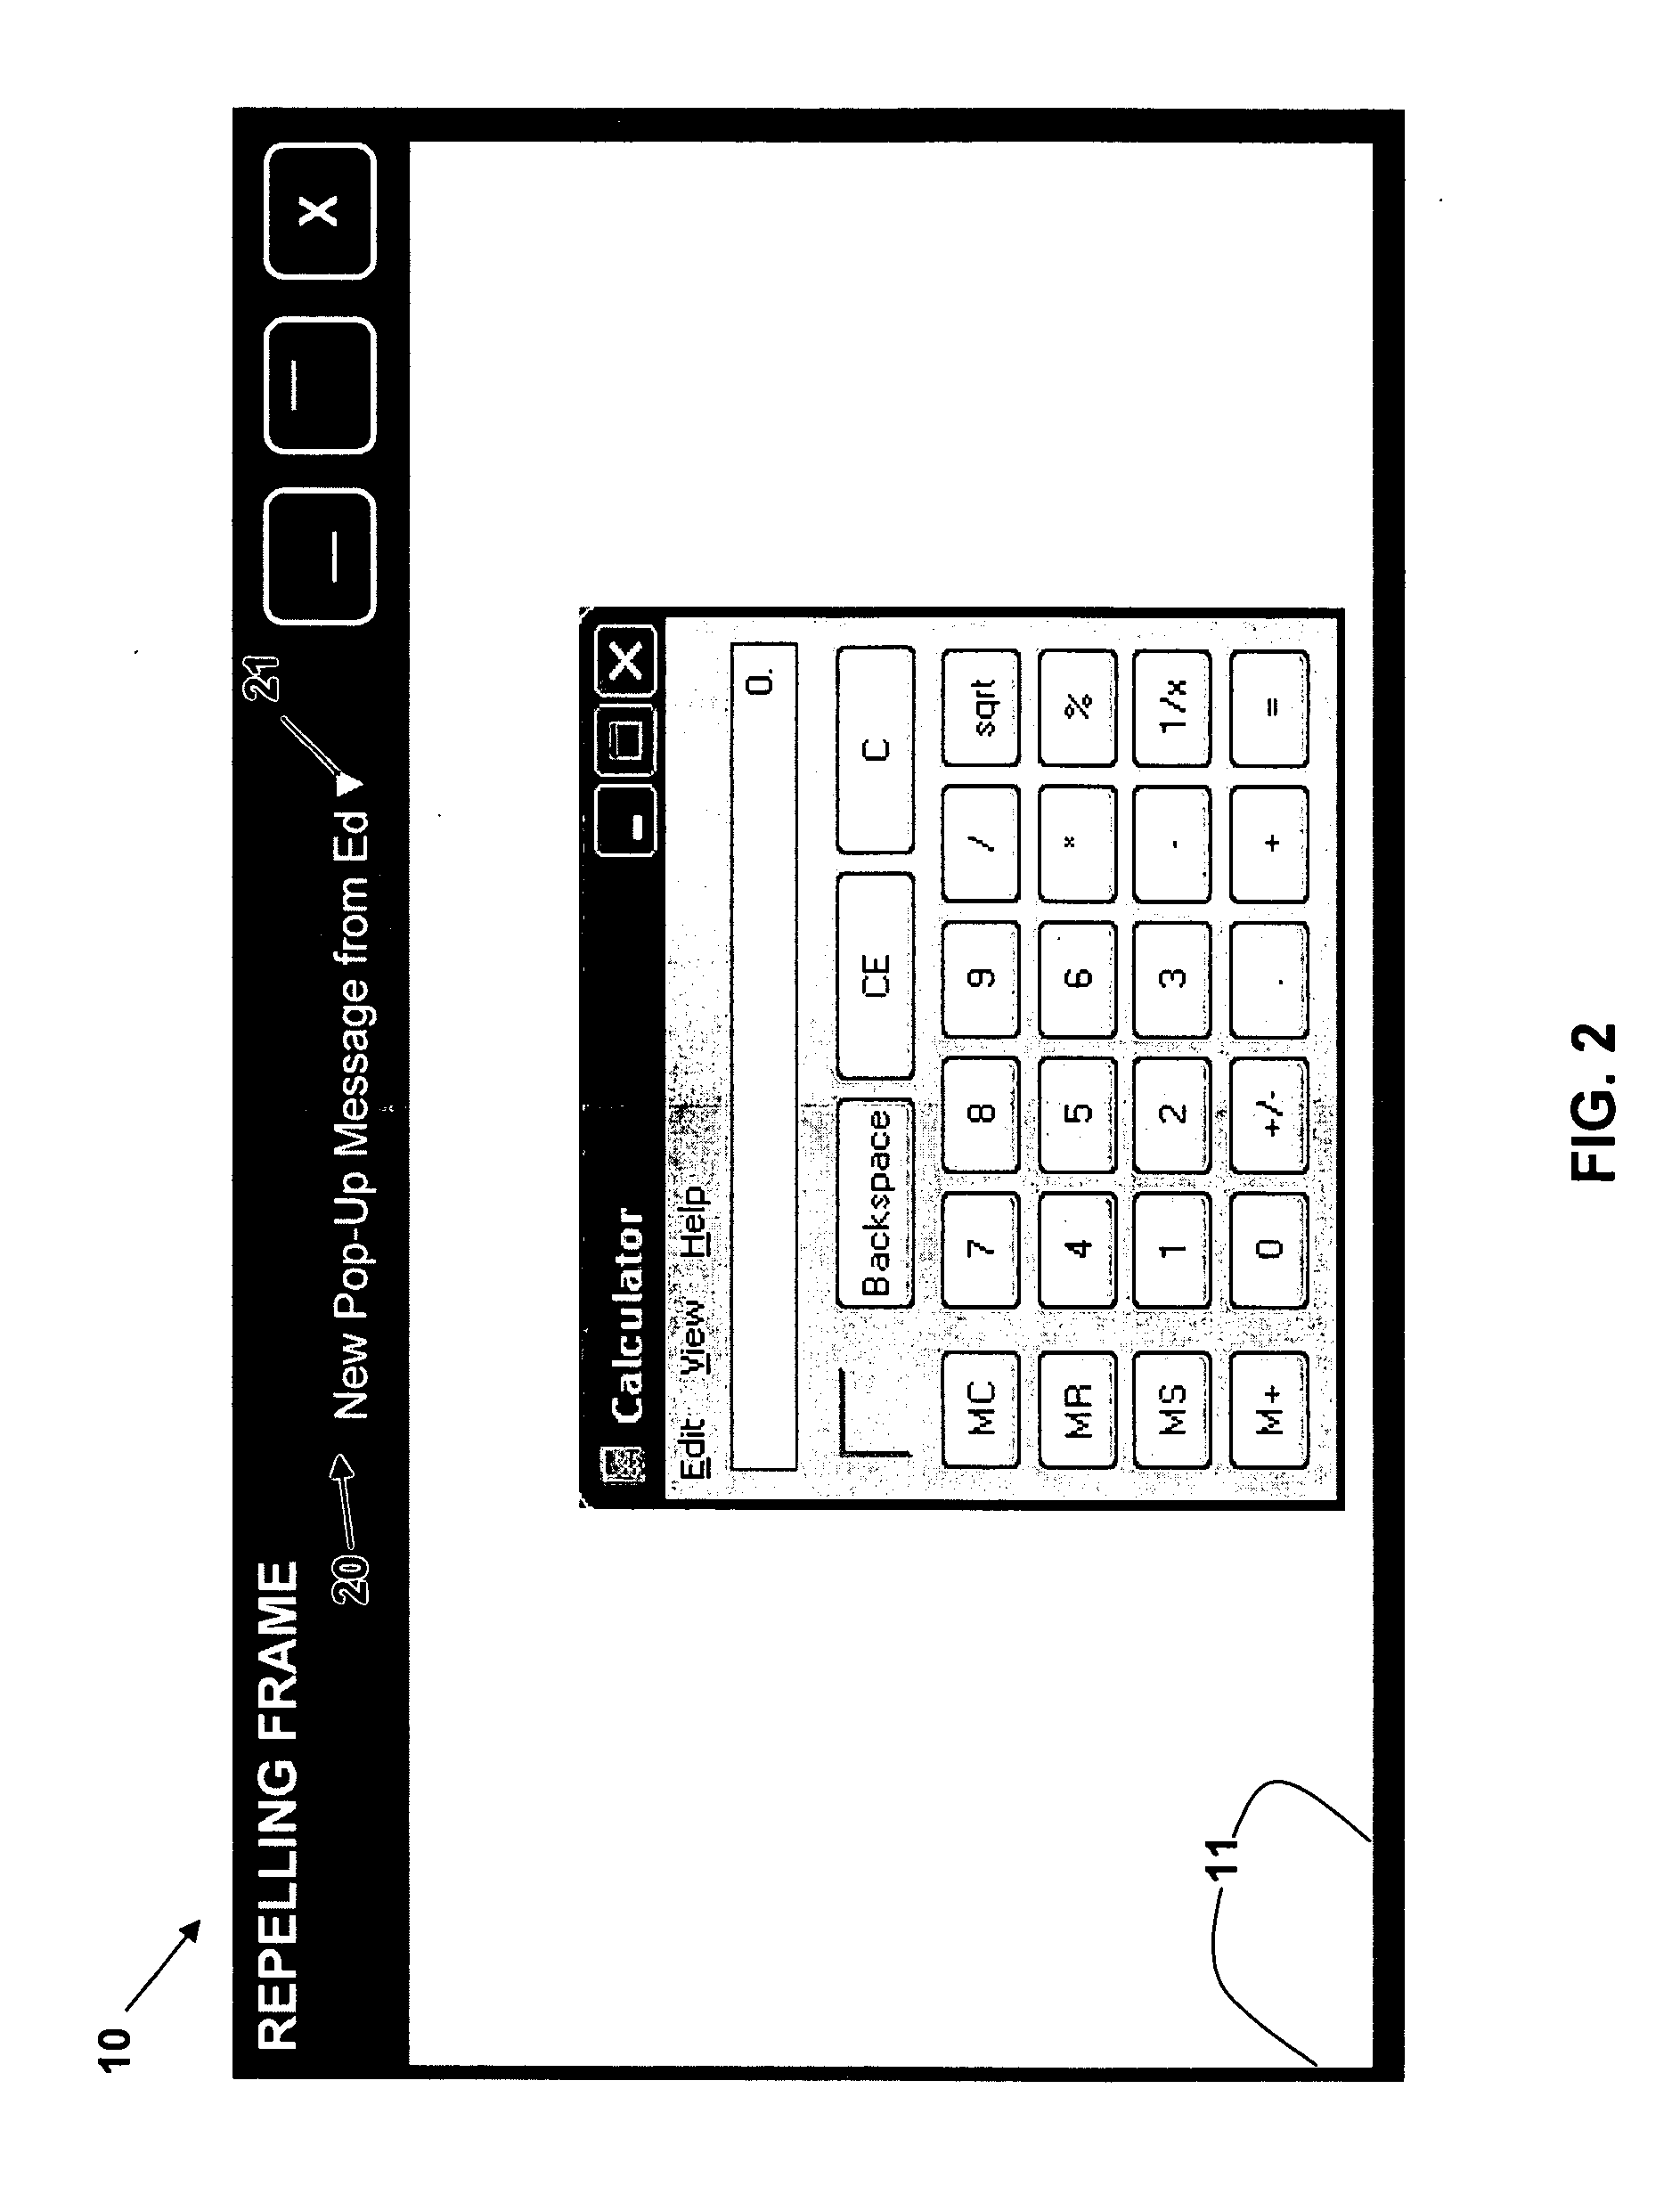 Pop-up repelling frame for use in screen sharing